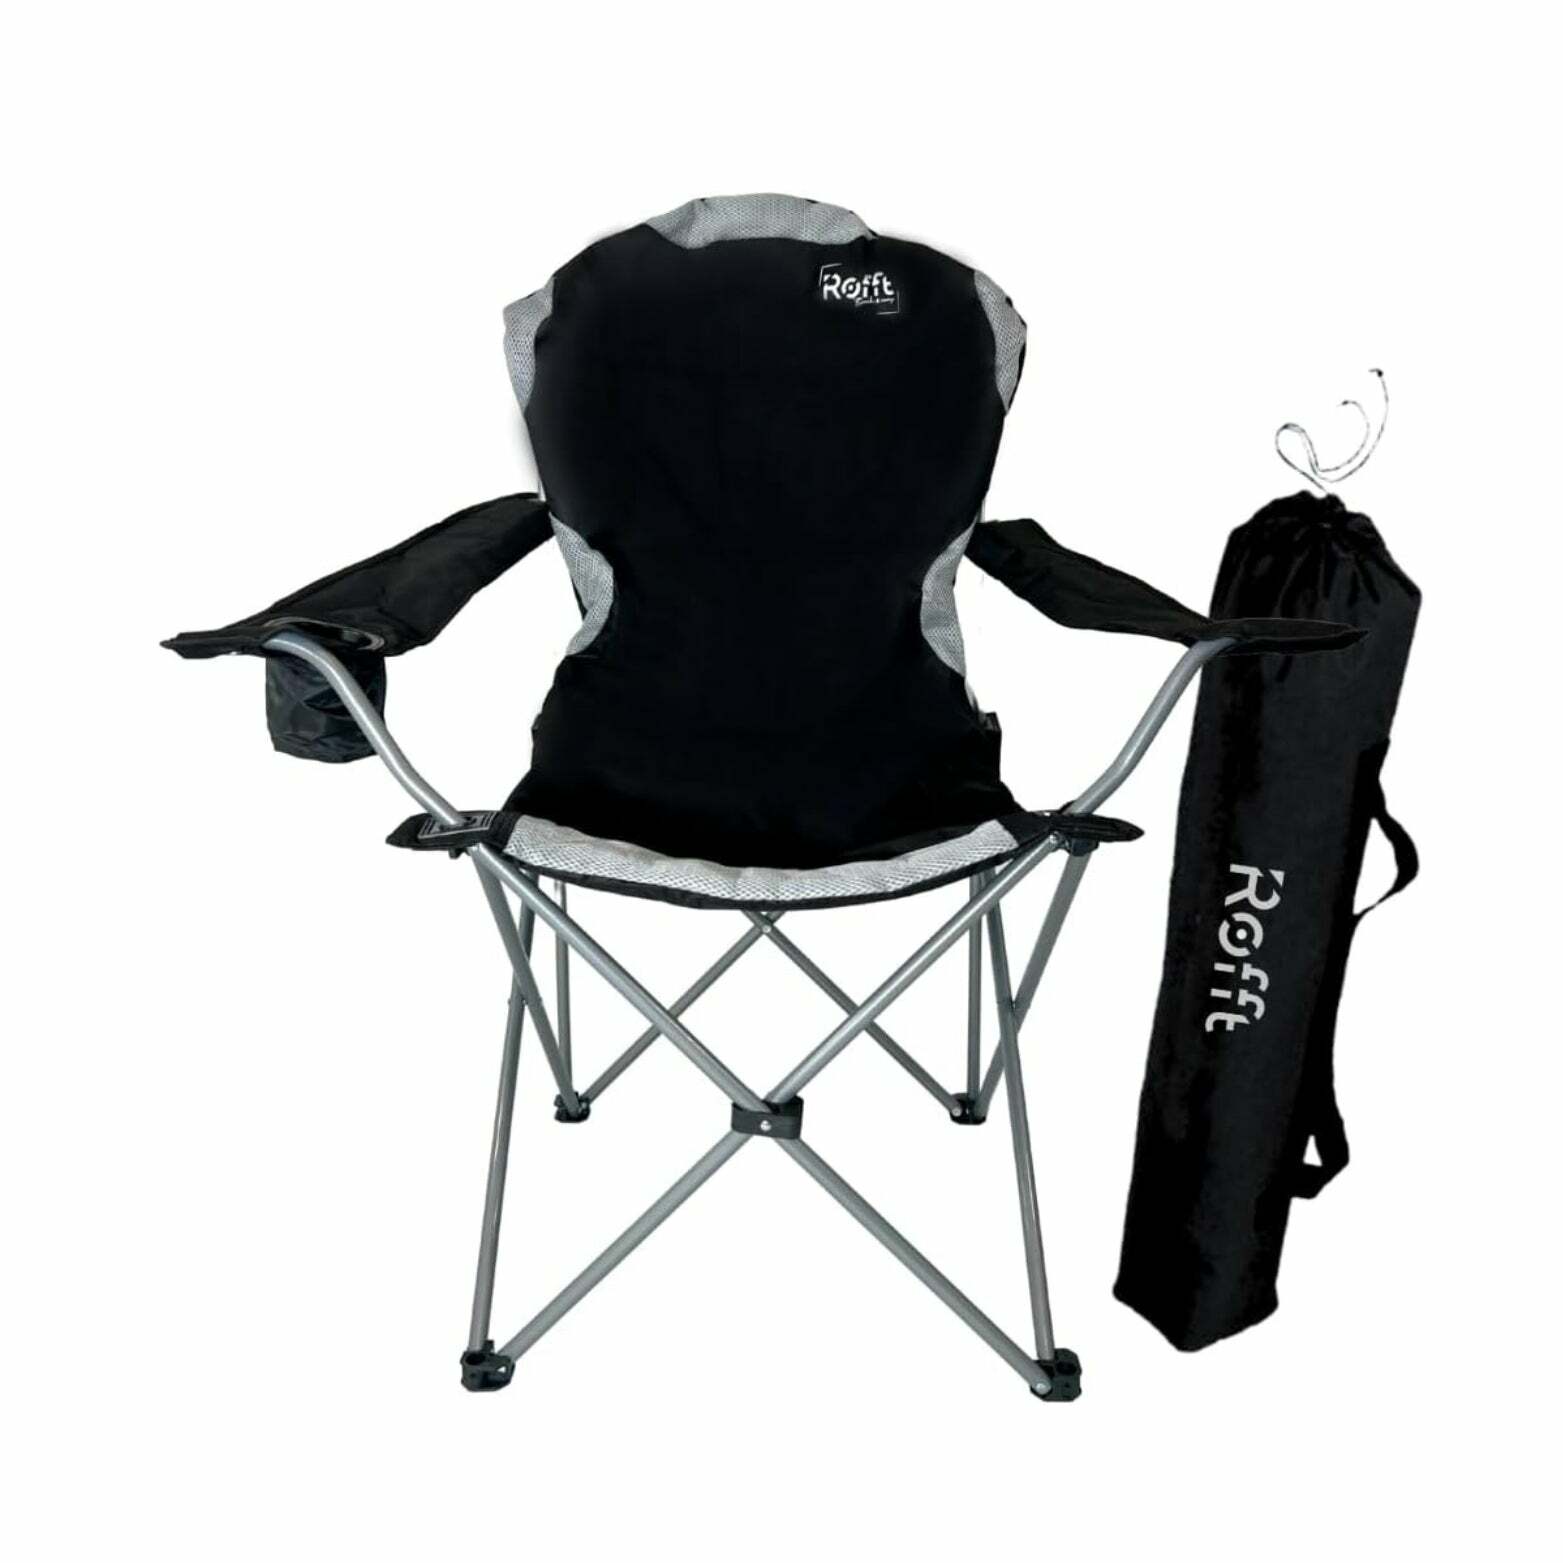 ROFFT Portable Camping Chair with Cooler - Collapsible, Comfort Padded, Cup Holder, Carry Bag Included, Black